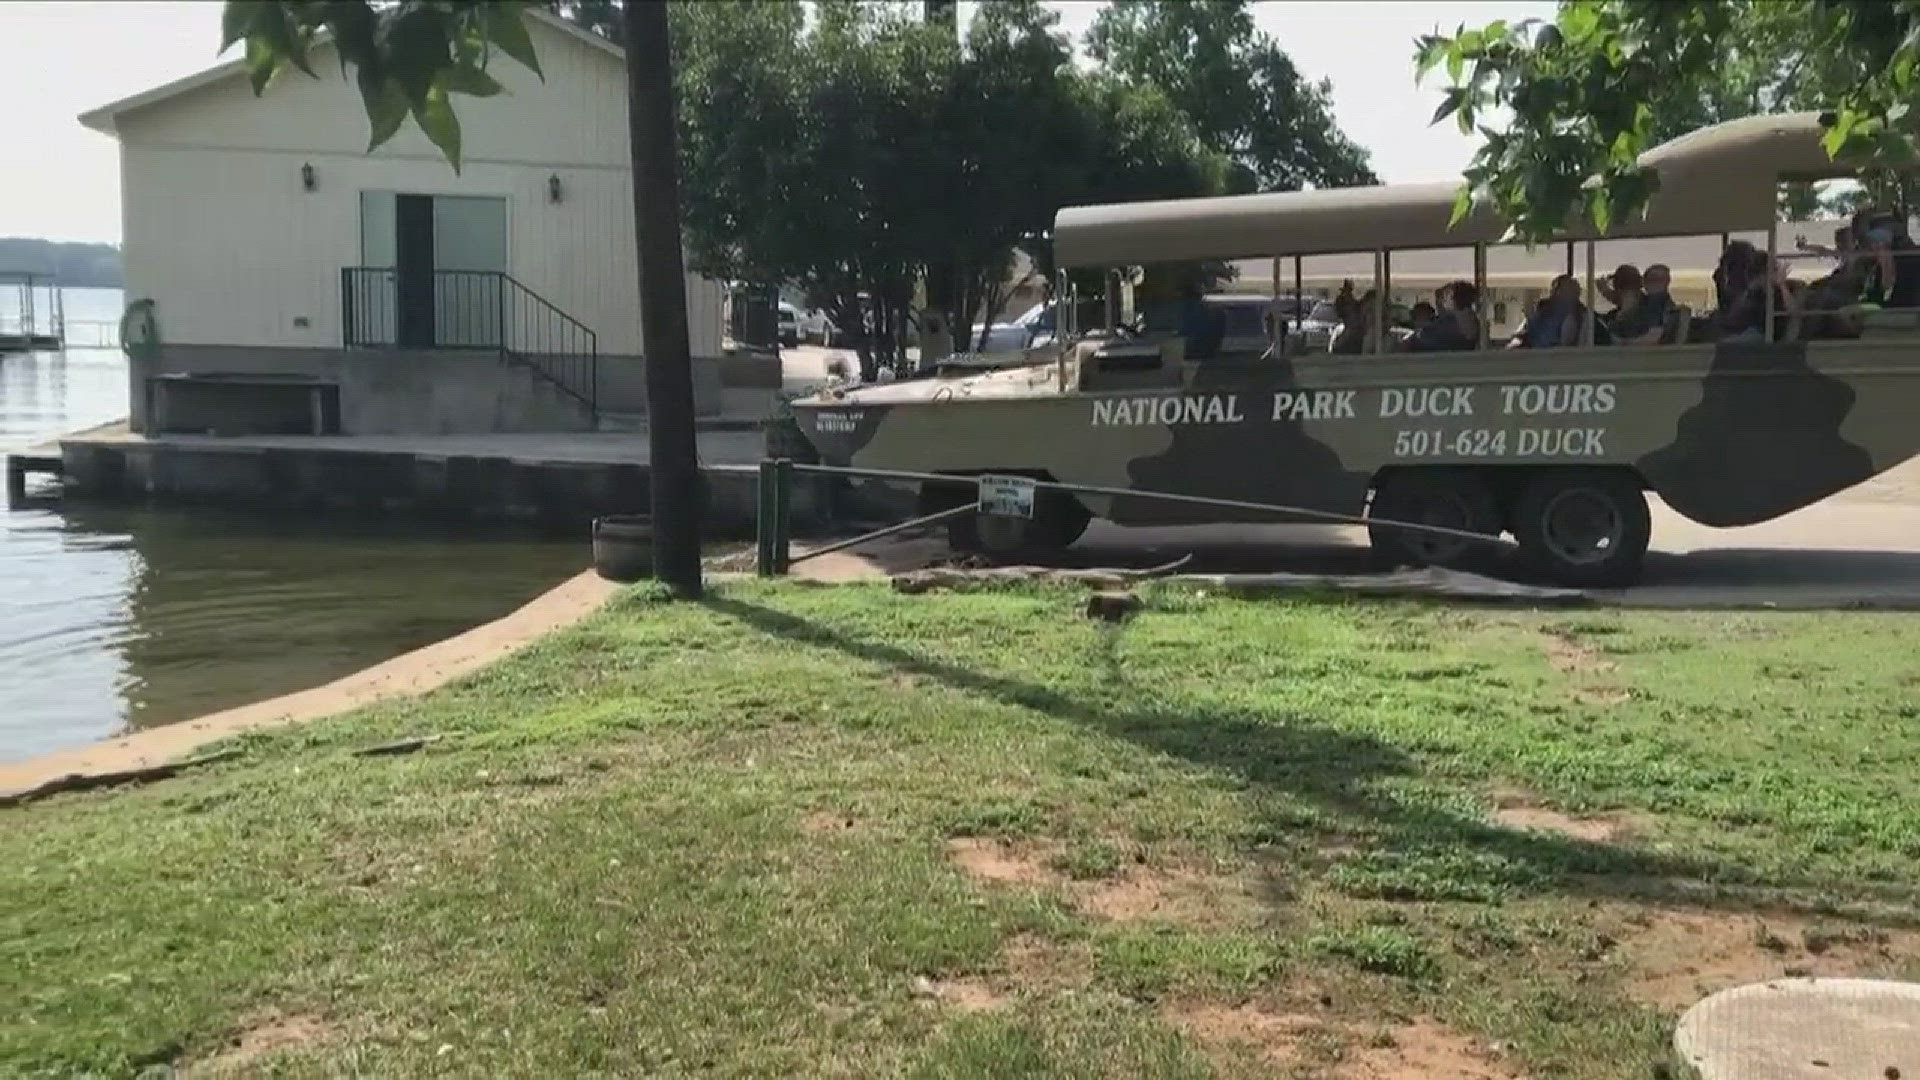 After a duck boat capsized in Branson, a Hot Springs duck boat tour company is continuing their business.